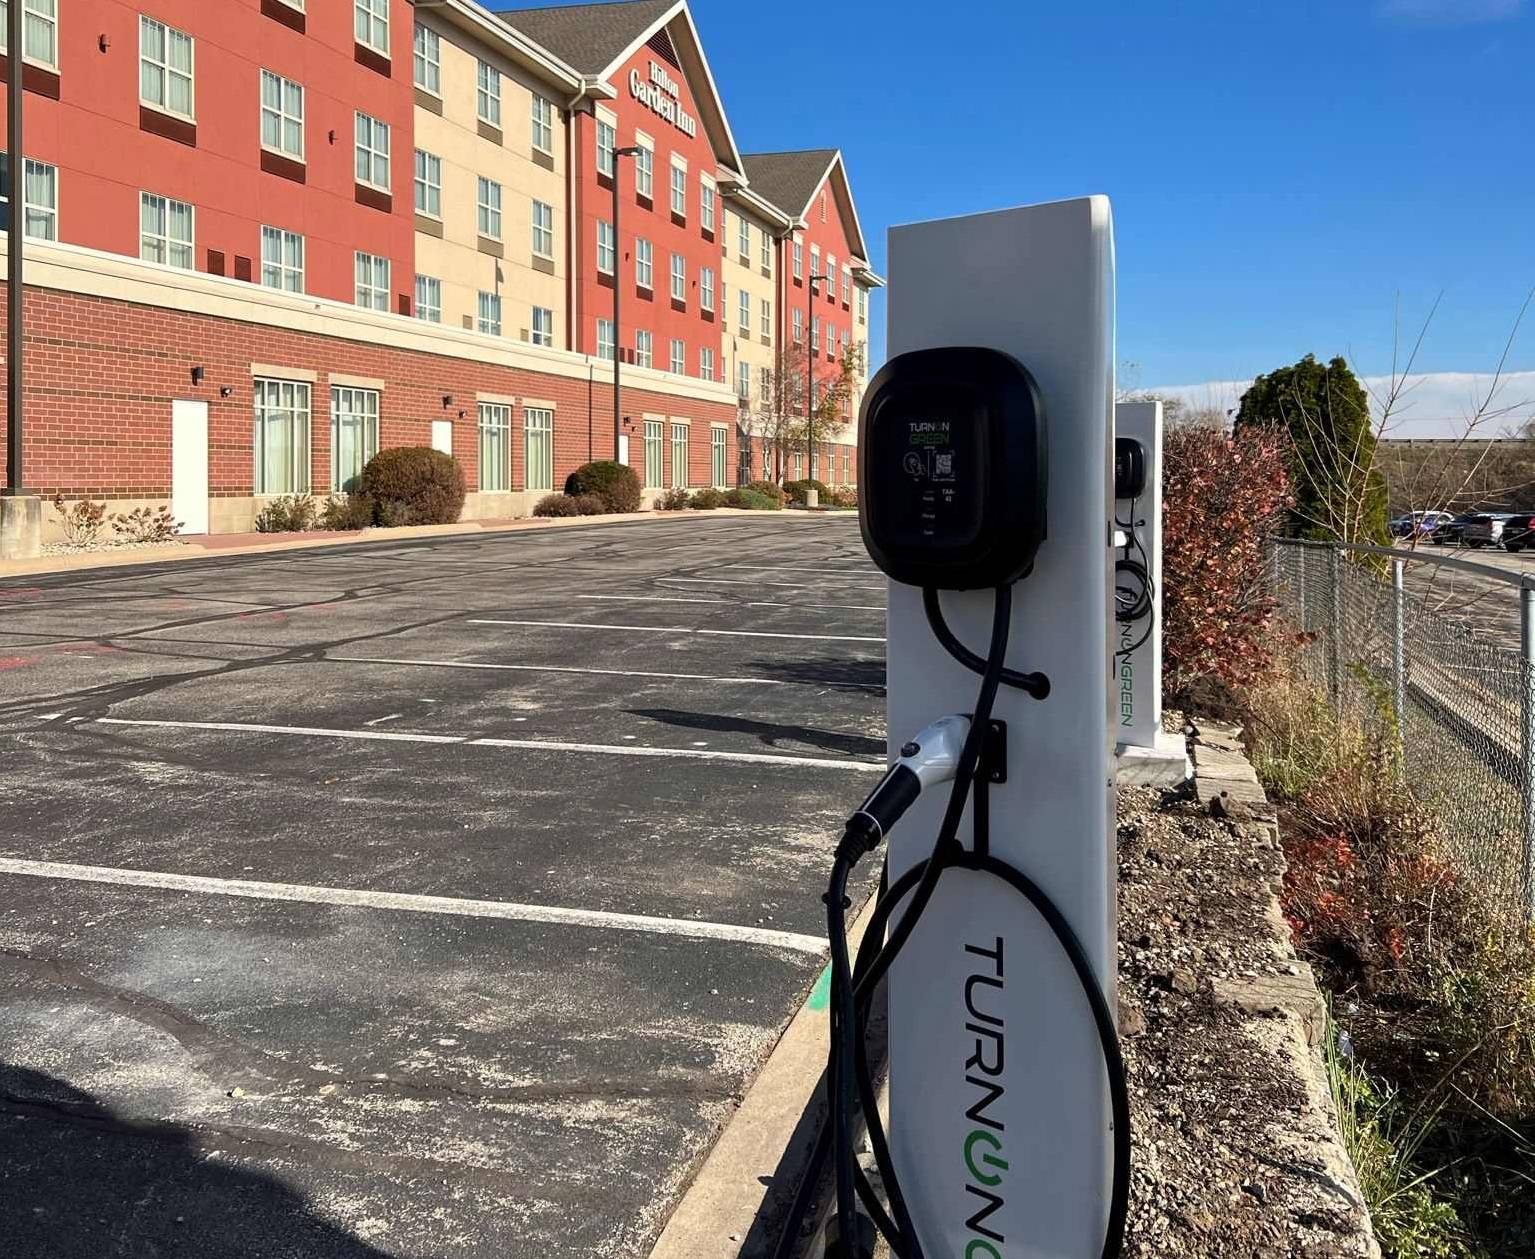 A TurnOnGreen EVP700G Level 2 EV networked high-powered charger at Hilton Garden Inn. Photo: Business Wire